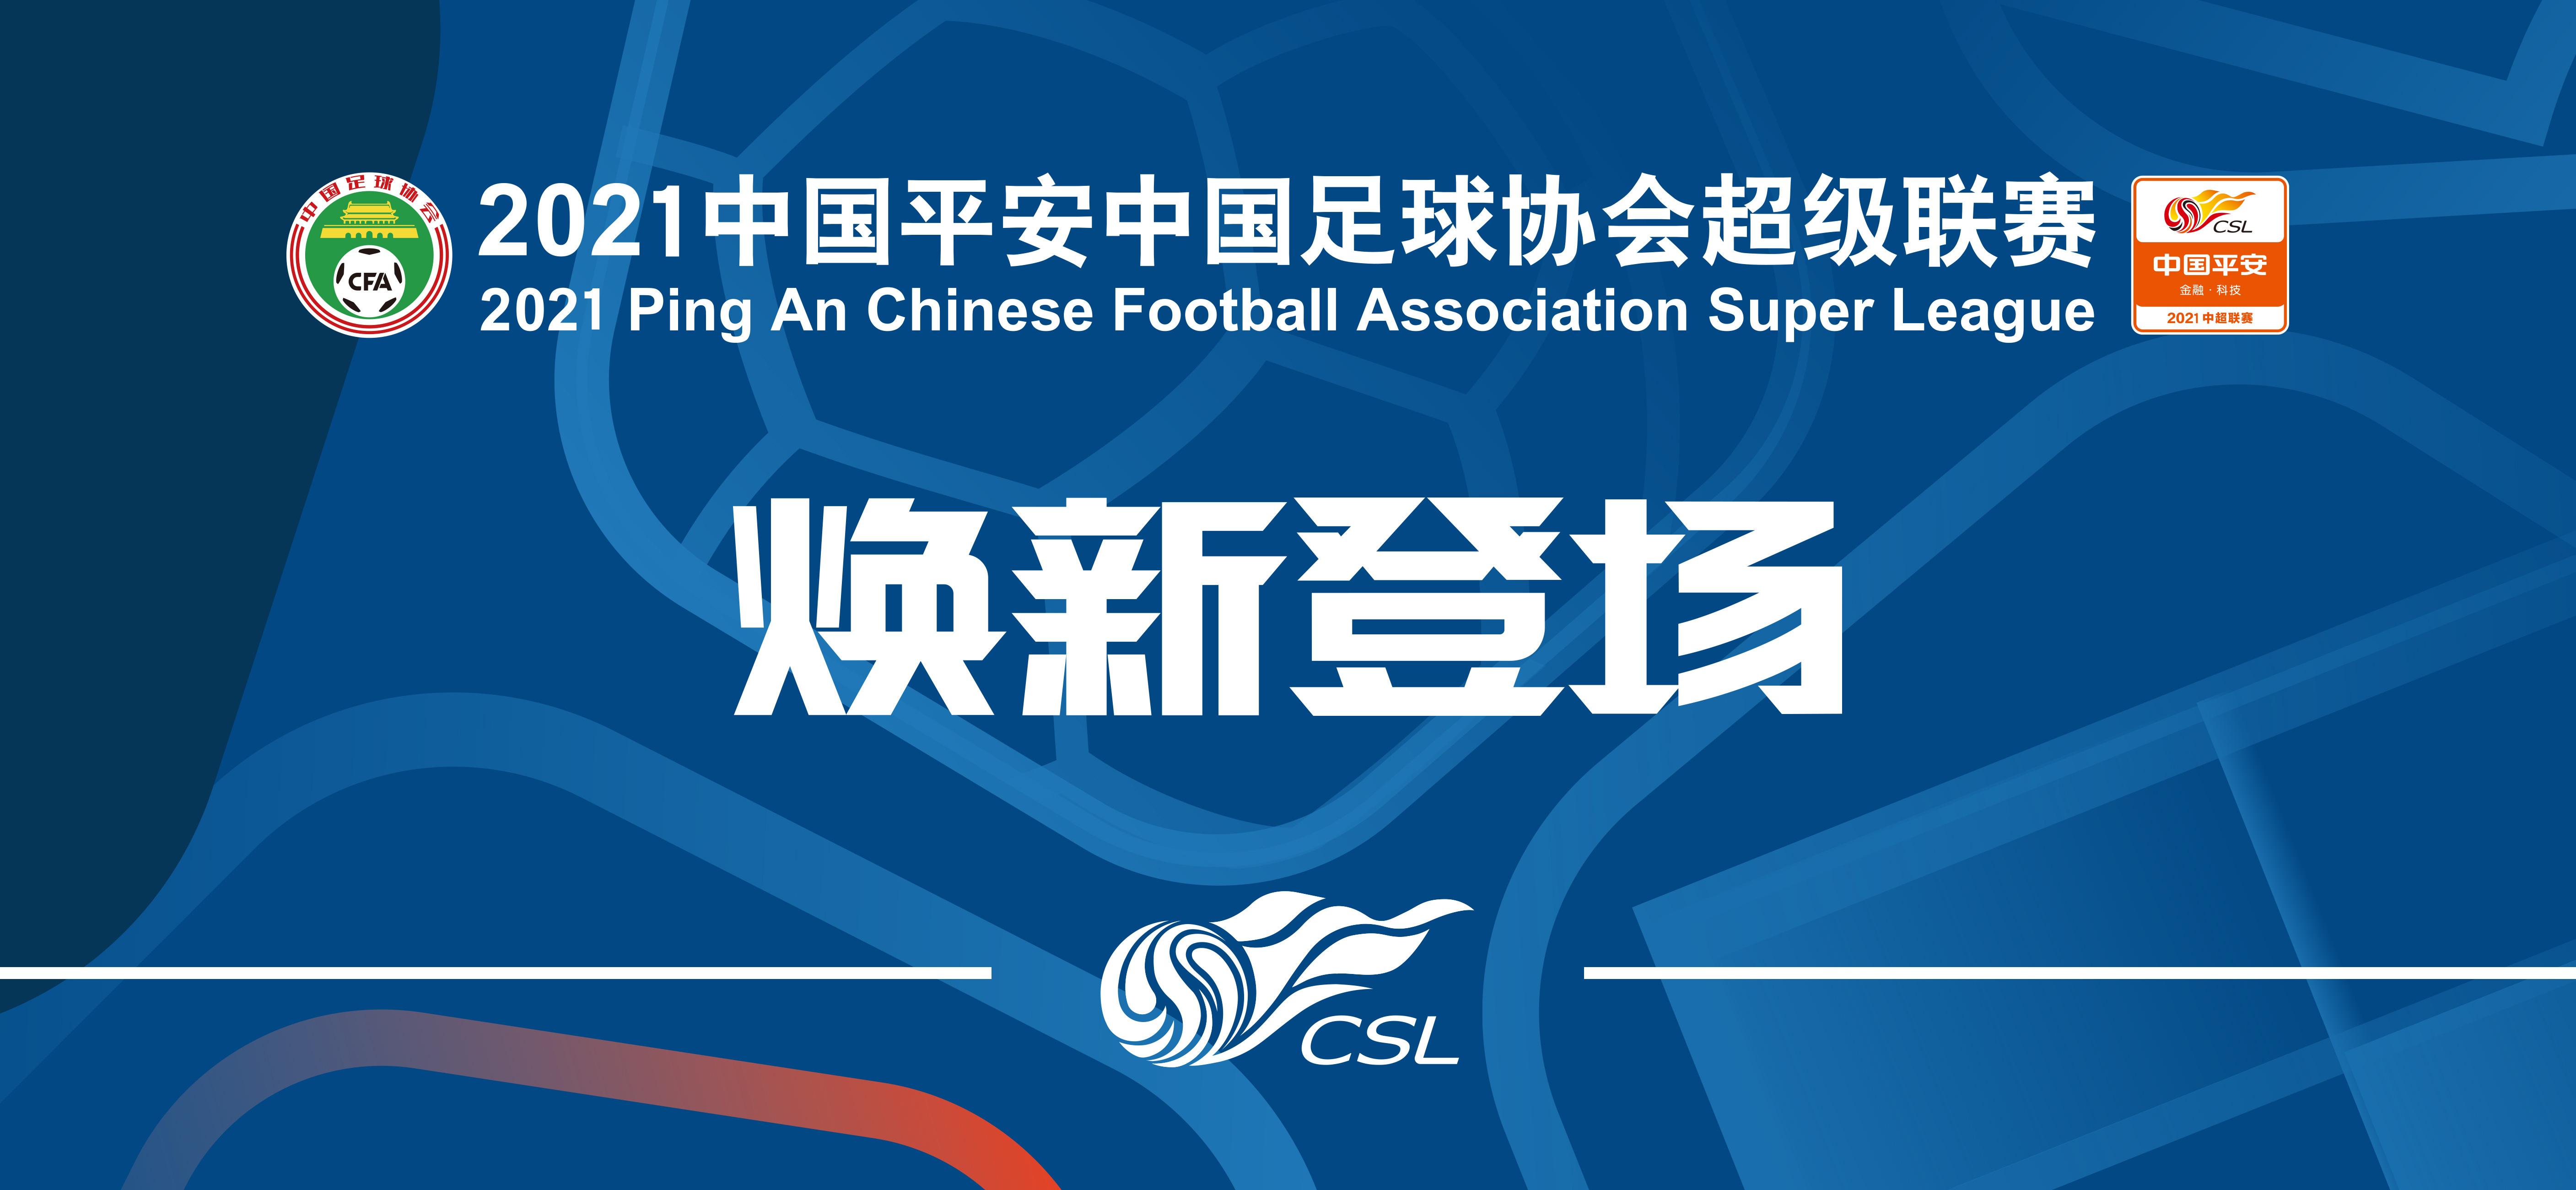 Chinese Super League re-scheduled for World Cup qualifiers - Xinhua